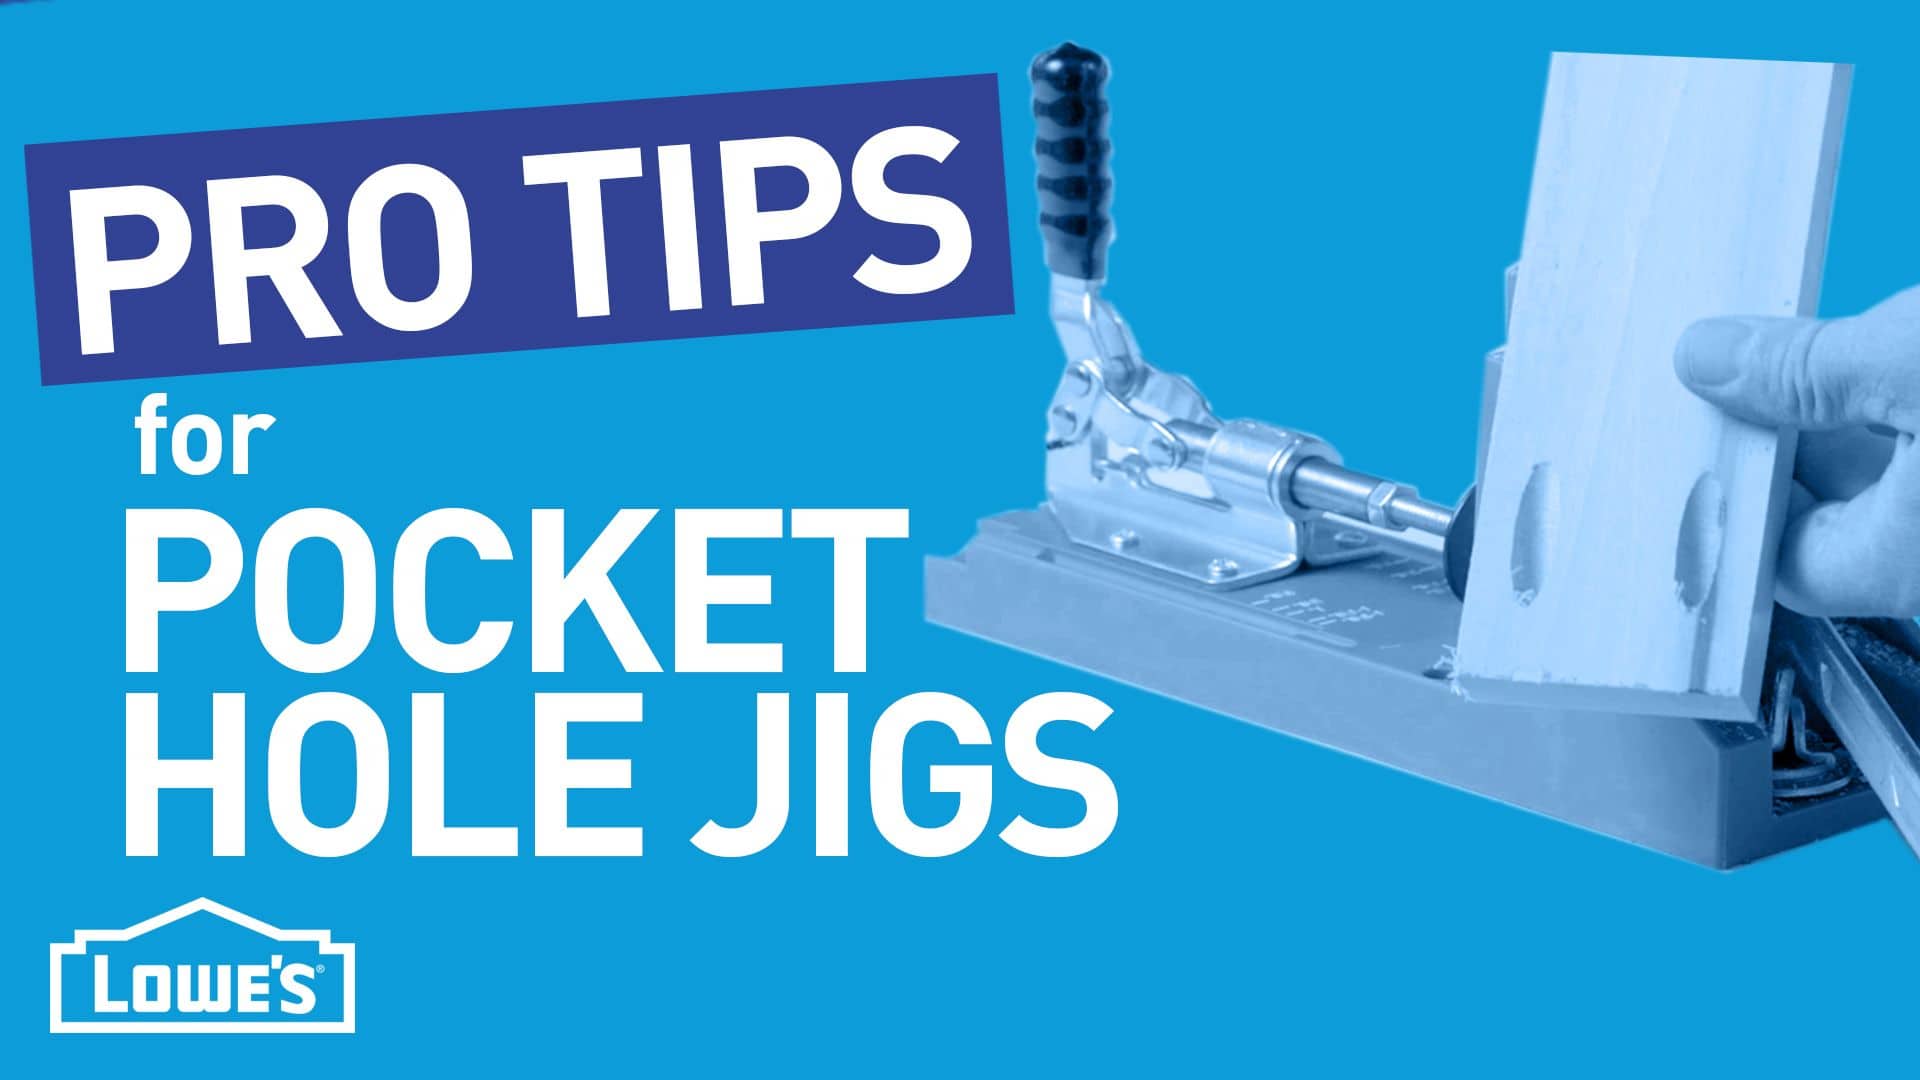 How to Use a Pocket Hole Jig - Complete Guide for Beginners!